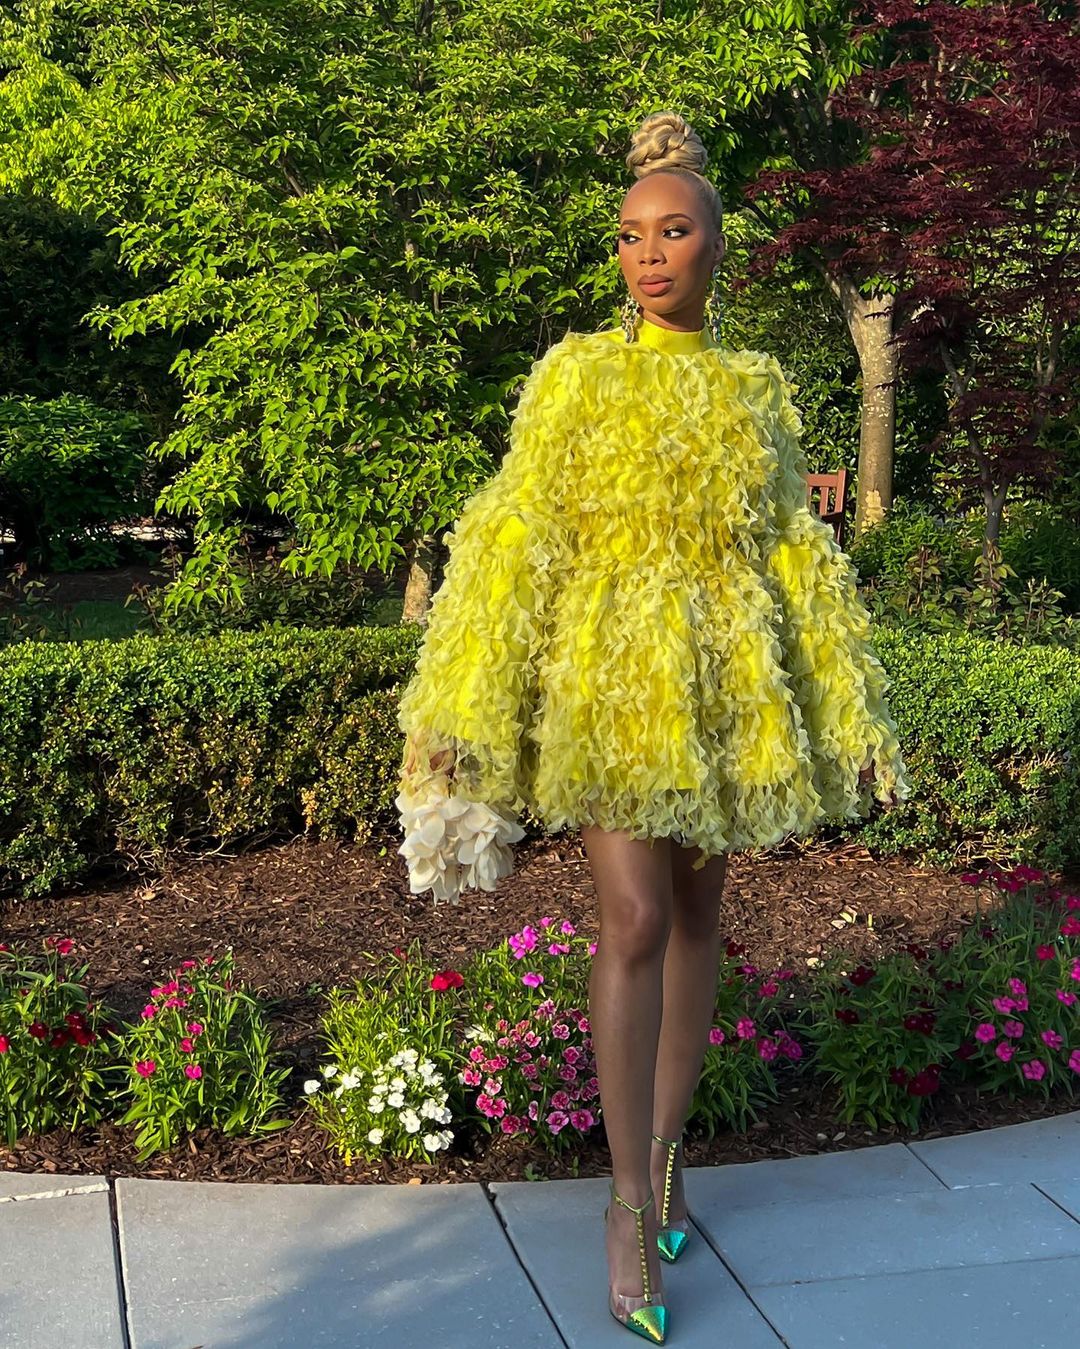 last-week-the-stylish-celebs-and-influencers-unapologetically-commanded-recognition